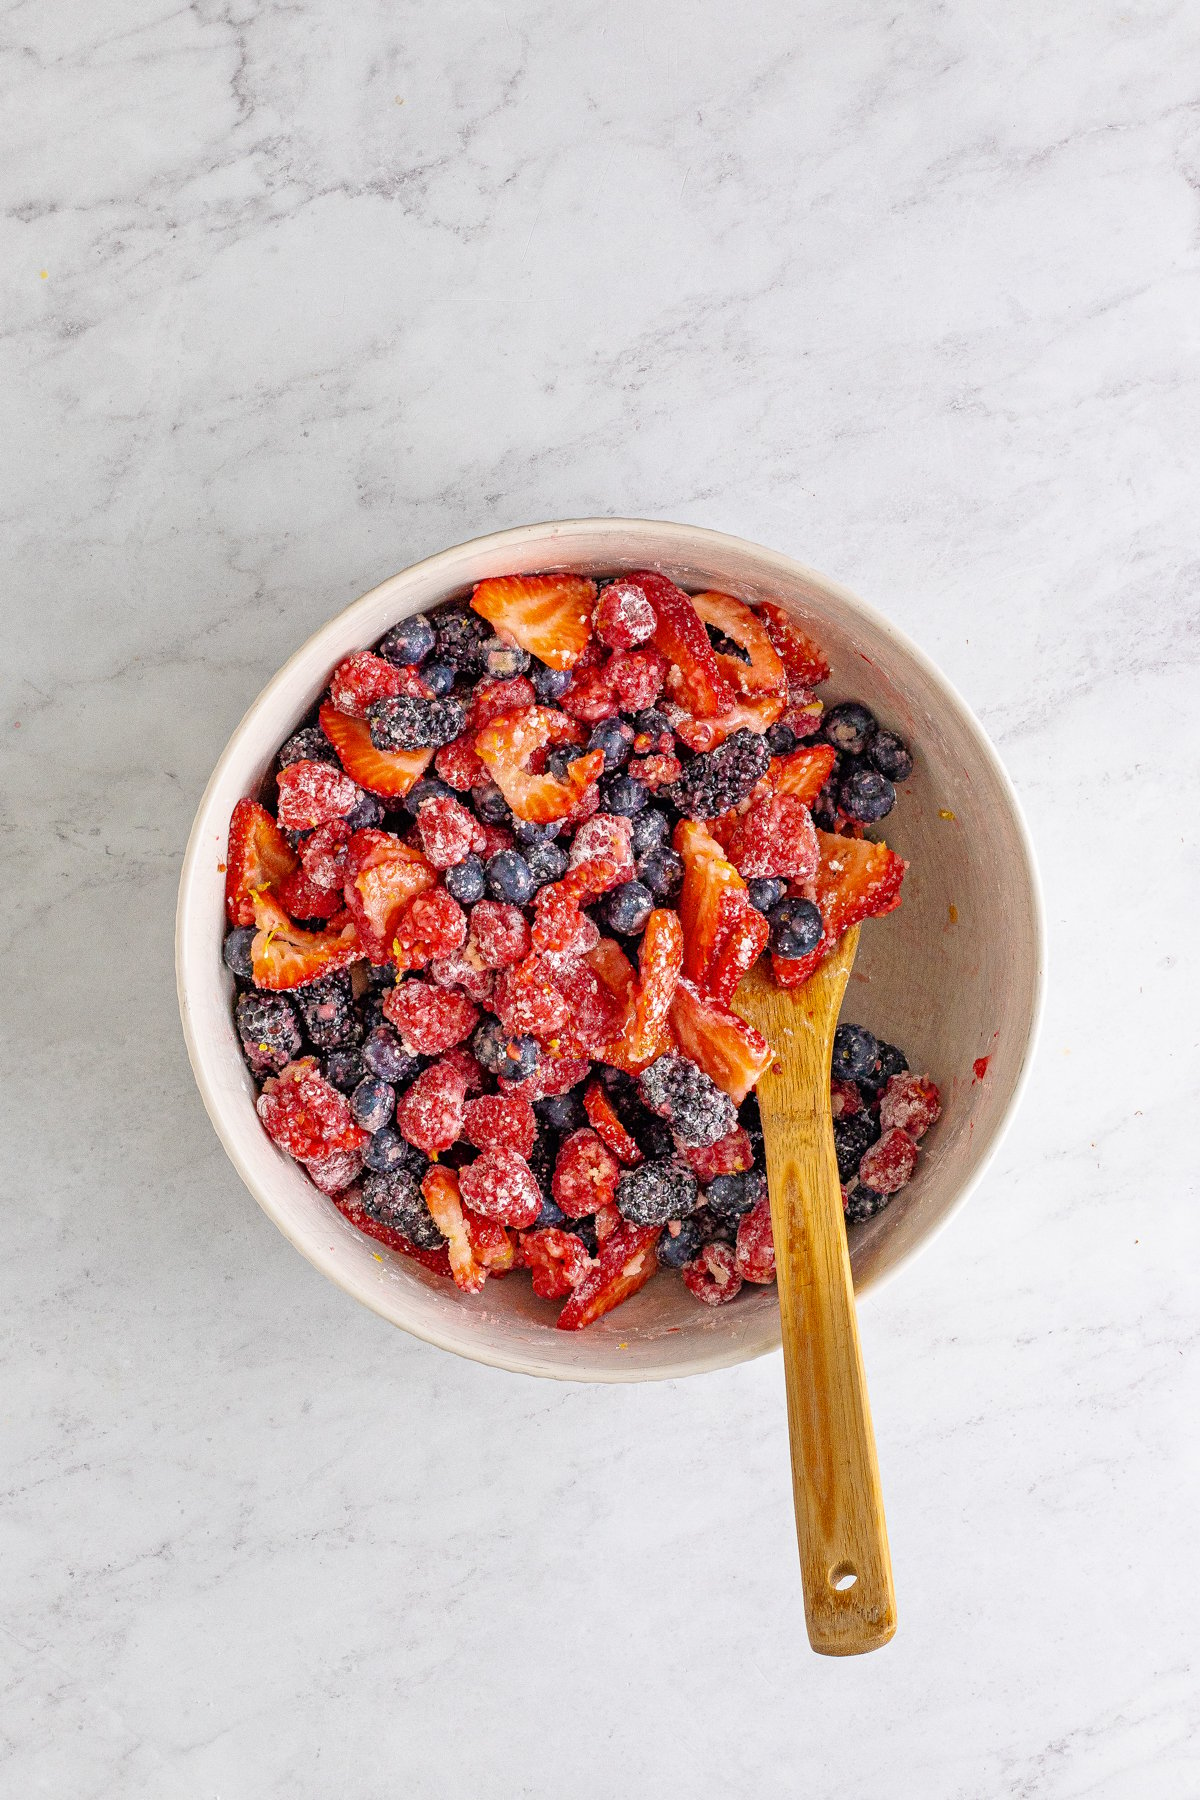 wooden spoon in a white bowl full of mixer berries